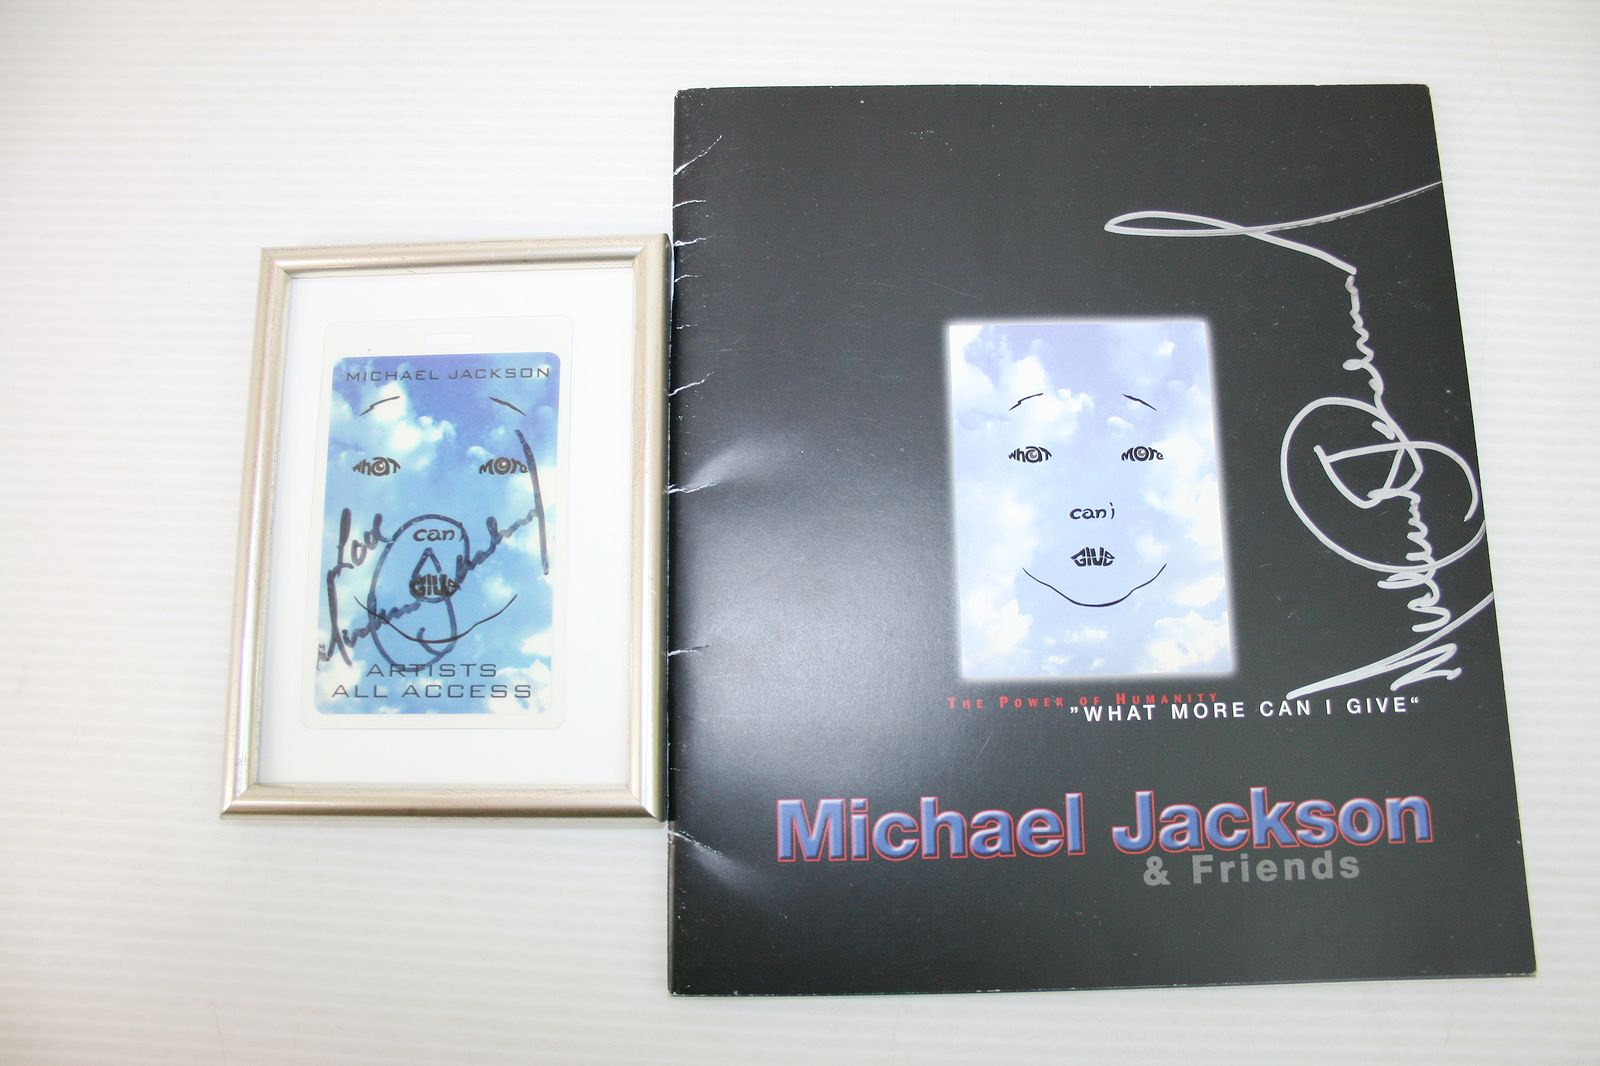 2010 Julien's AUCTION マイケル・ジャクソン What More Can I Give サイン入りパス&サイン入りプログラム